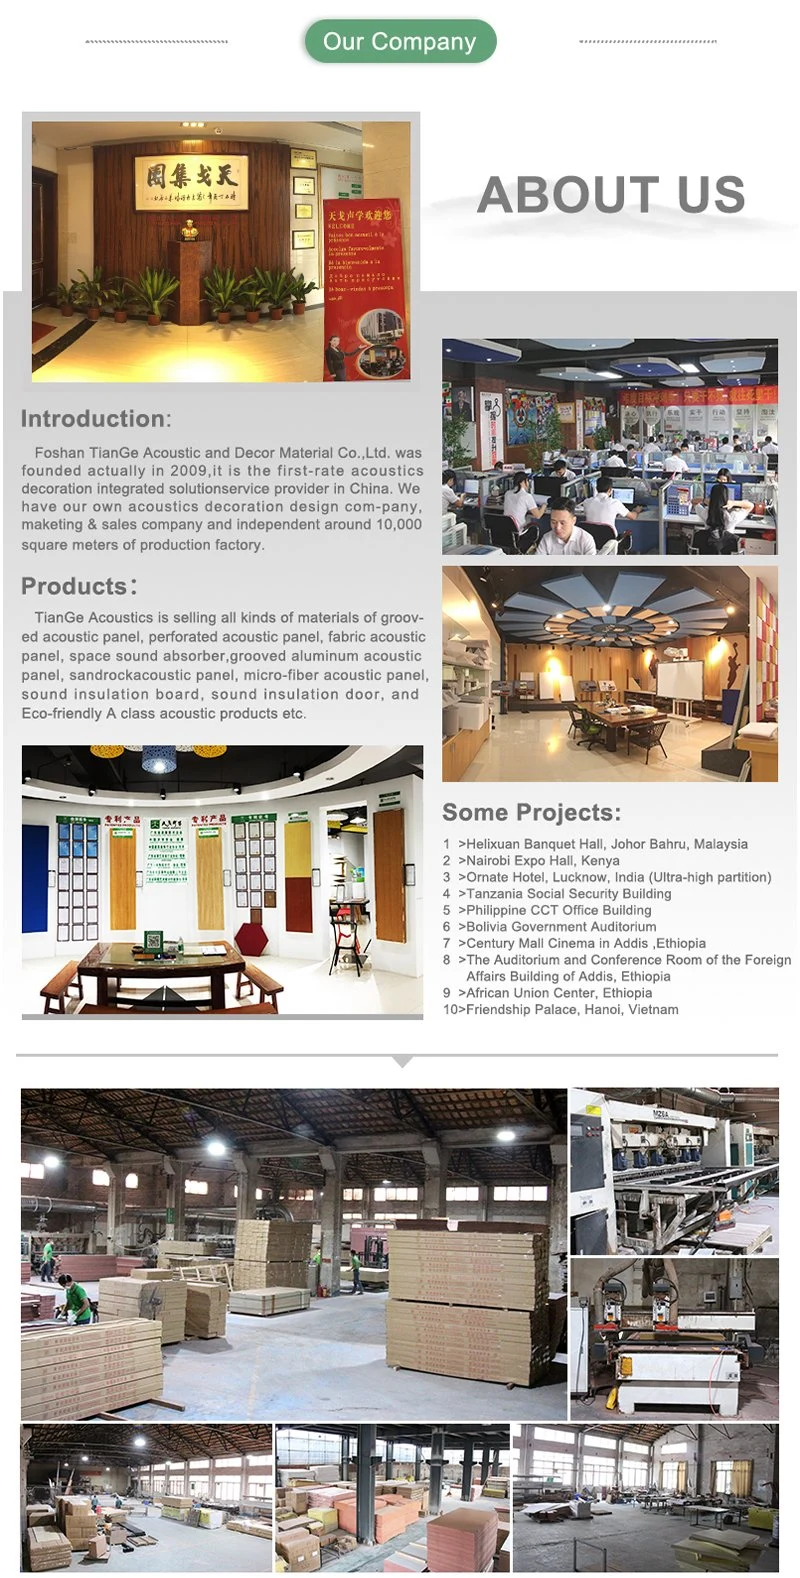 Tiange MDF Soundproof Decorative Wooden Grooved Acoustic Sound Absorption Ceiling and Stadium Acoustic Wall Panel